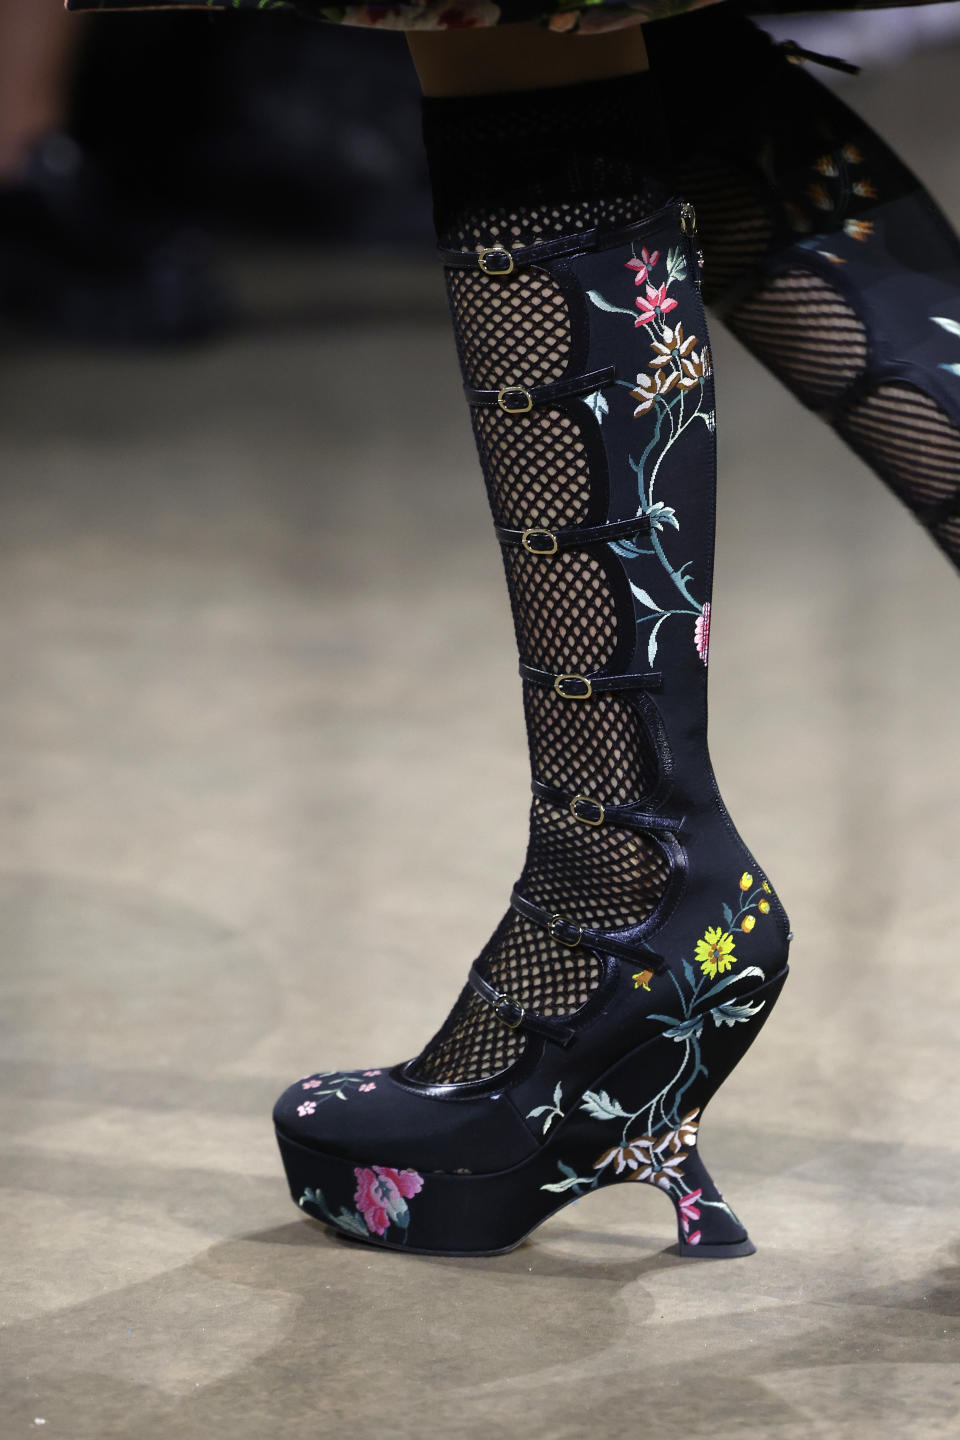 Christian Dior’s buckled Mary Janes for spring summer ’23. - Credit: Getty Images